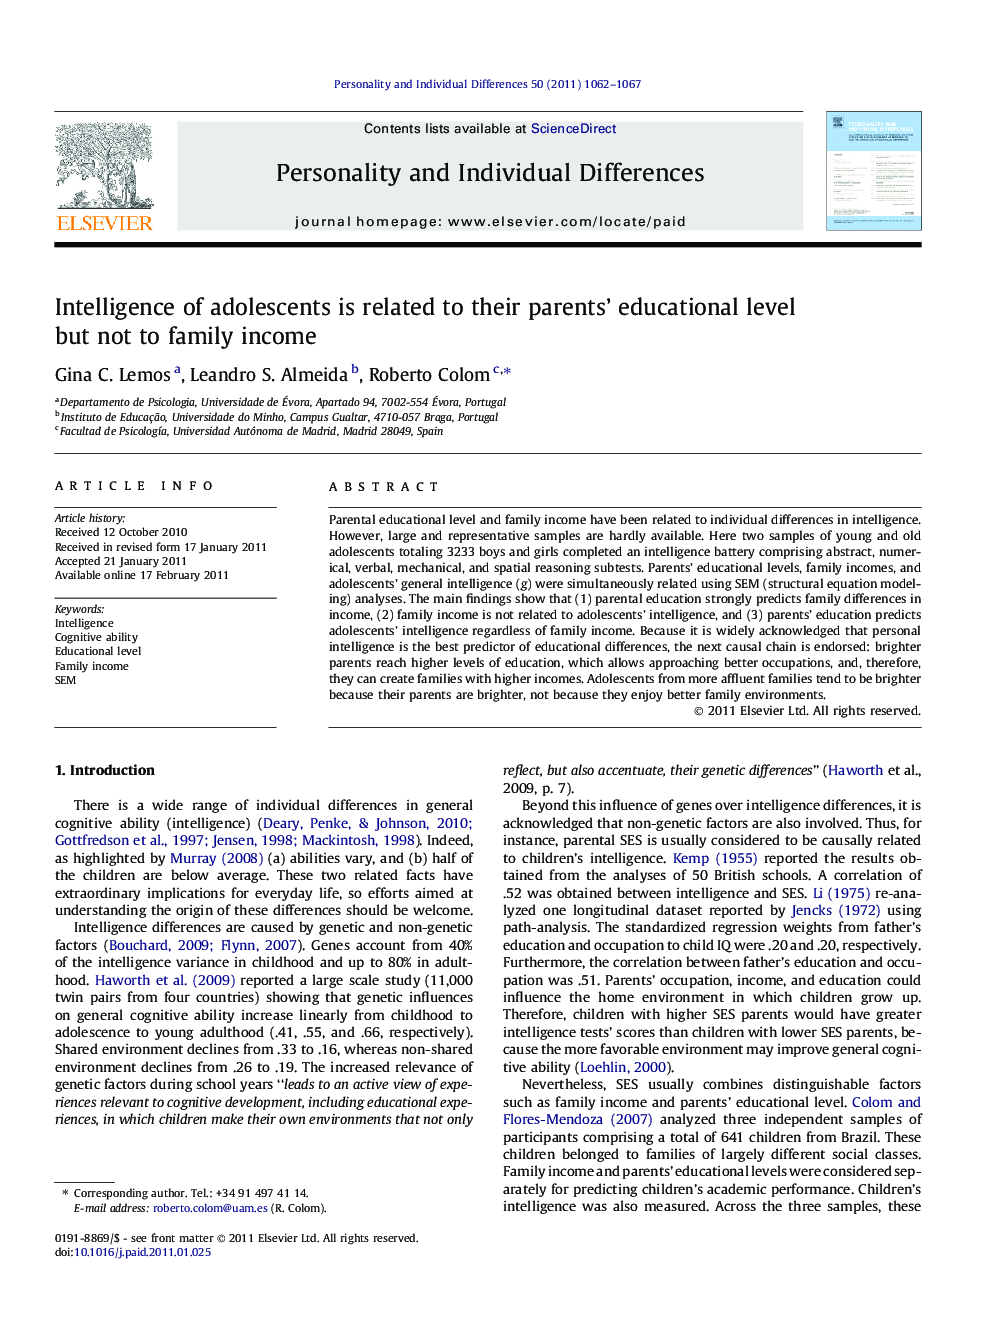 Intelligence of adolescents is related to their parents’ educational level but not to family income